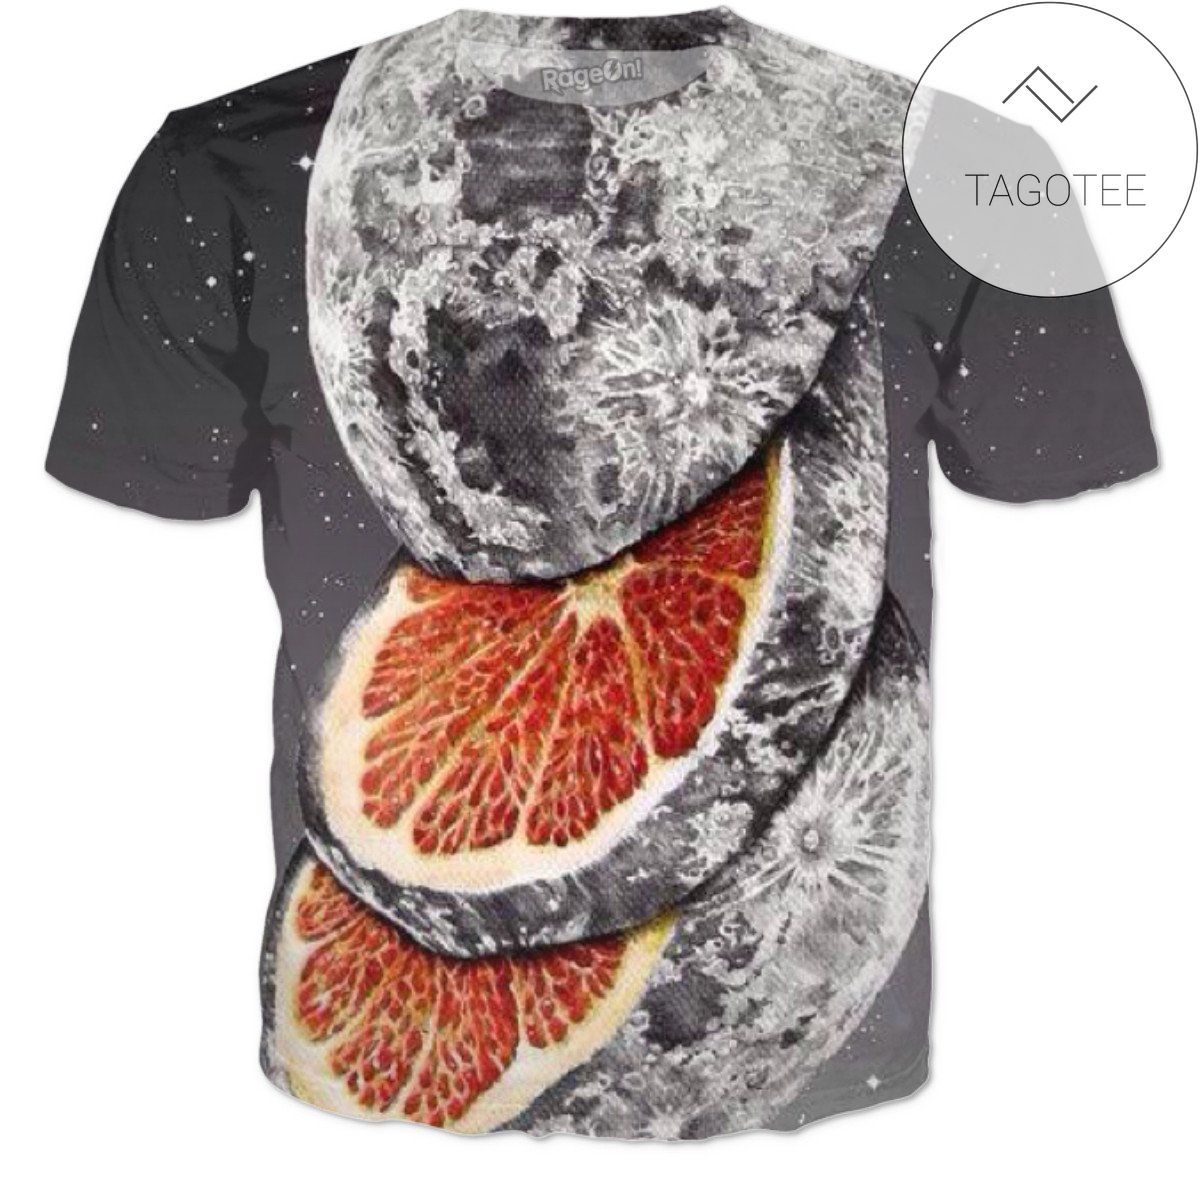 Rageon Slice Of The Moon All Over Print T-shirt Design